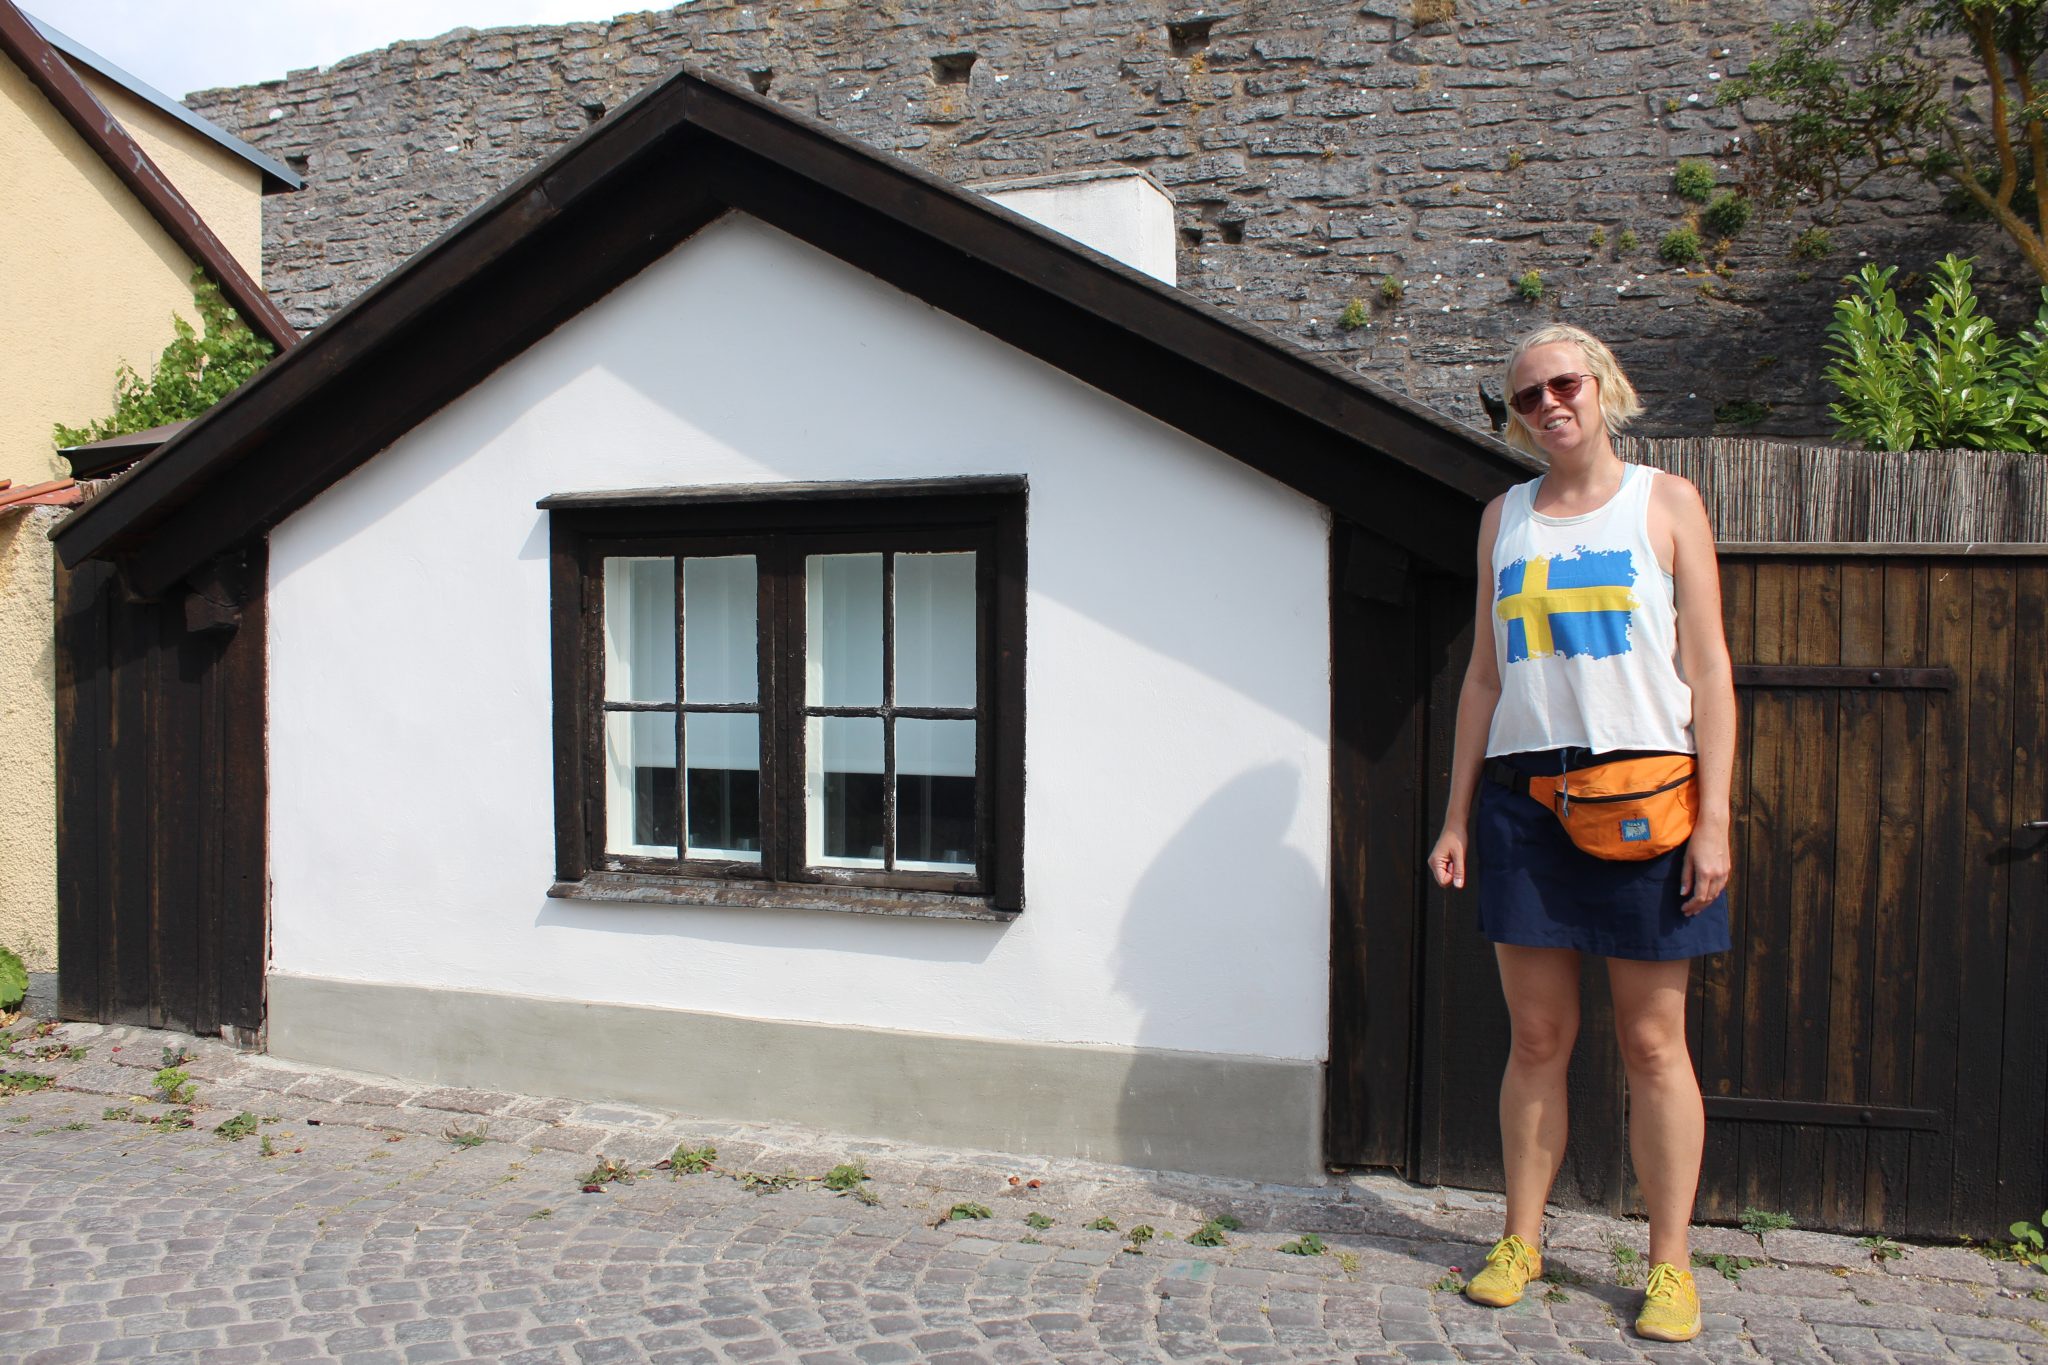 The smallest of all the small houses in Visby. I'm posing purely for scale.